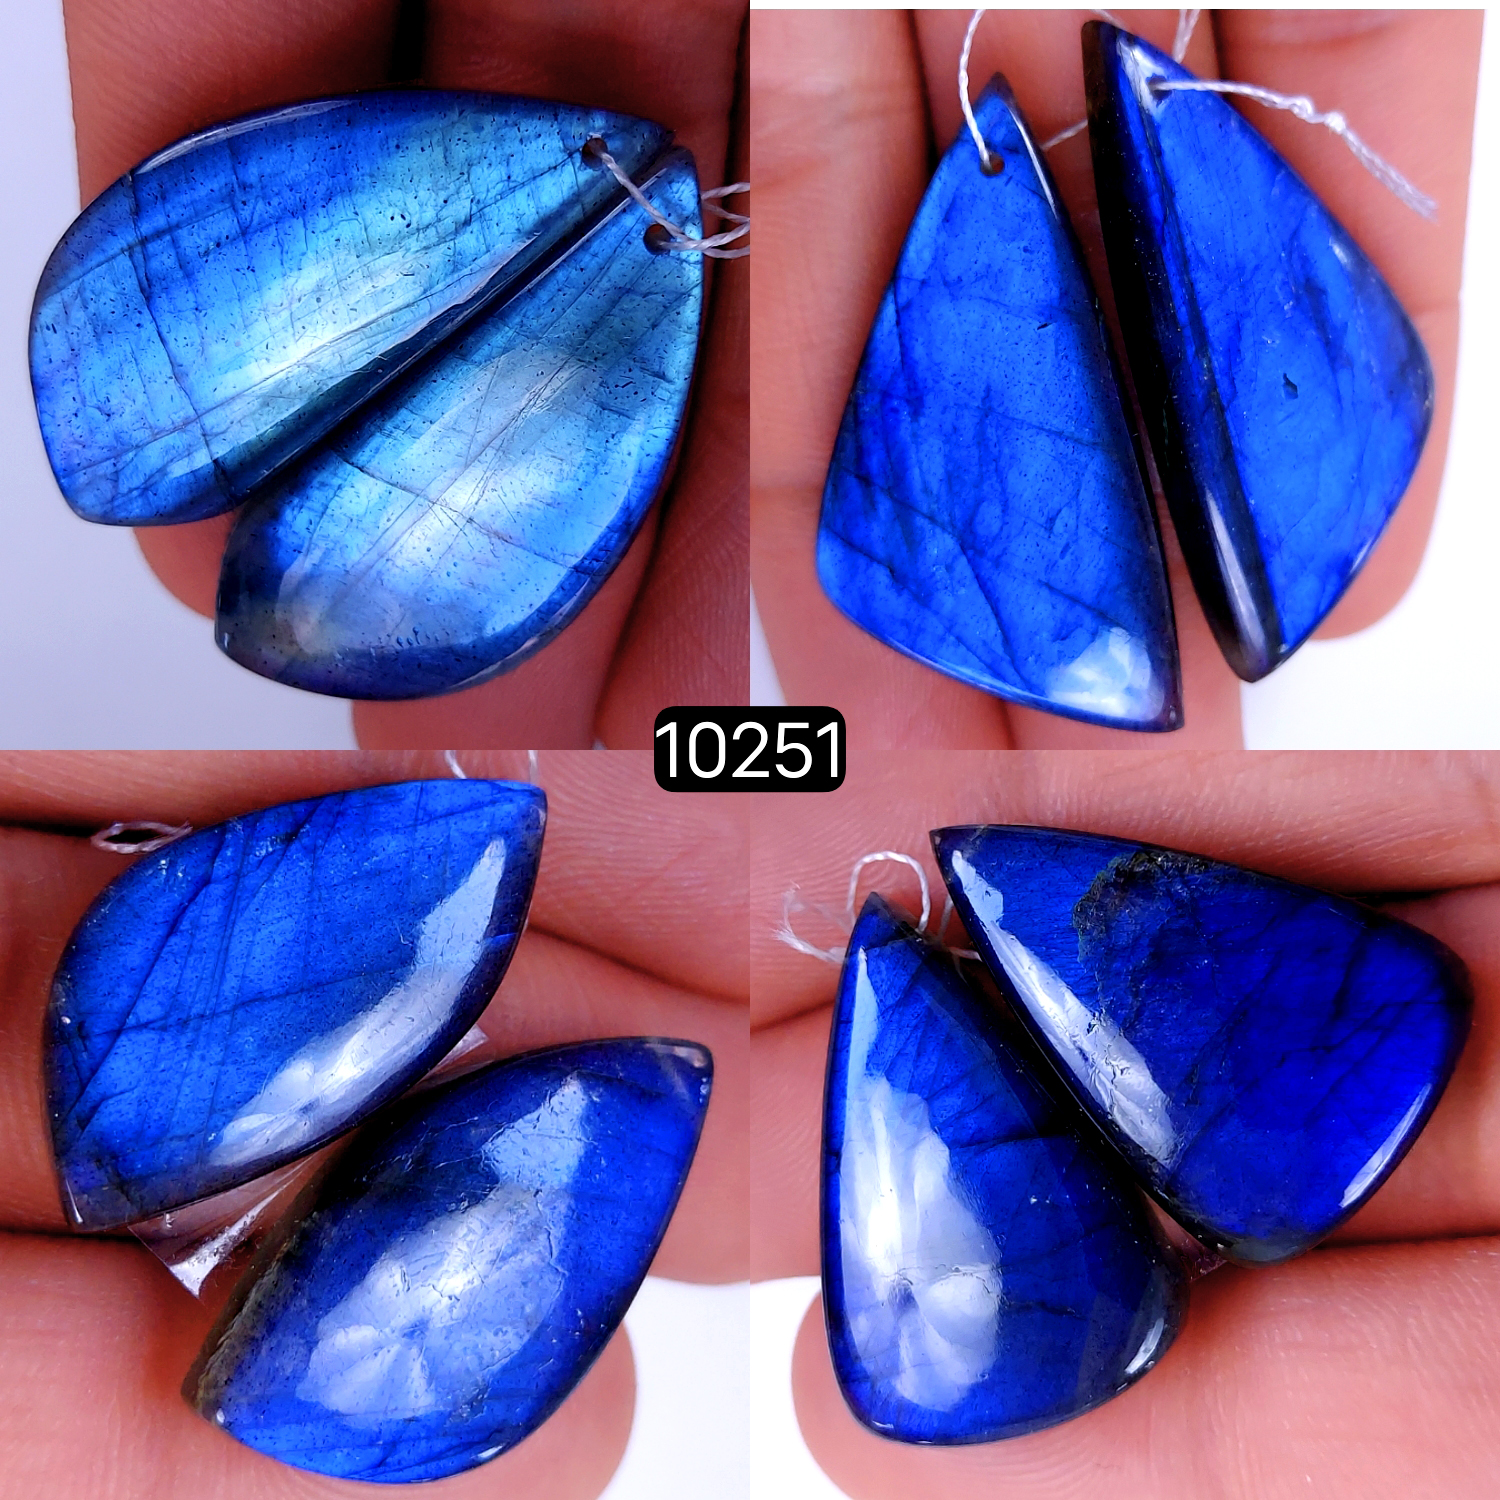 4Pair 232Cts Natural Labradorite Crystal Drill Dangle Drop Earring Pairs Silver Earrings Blue Labradorite Hoop Jewelry  42x20 30x20mm #10251